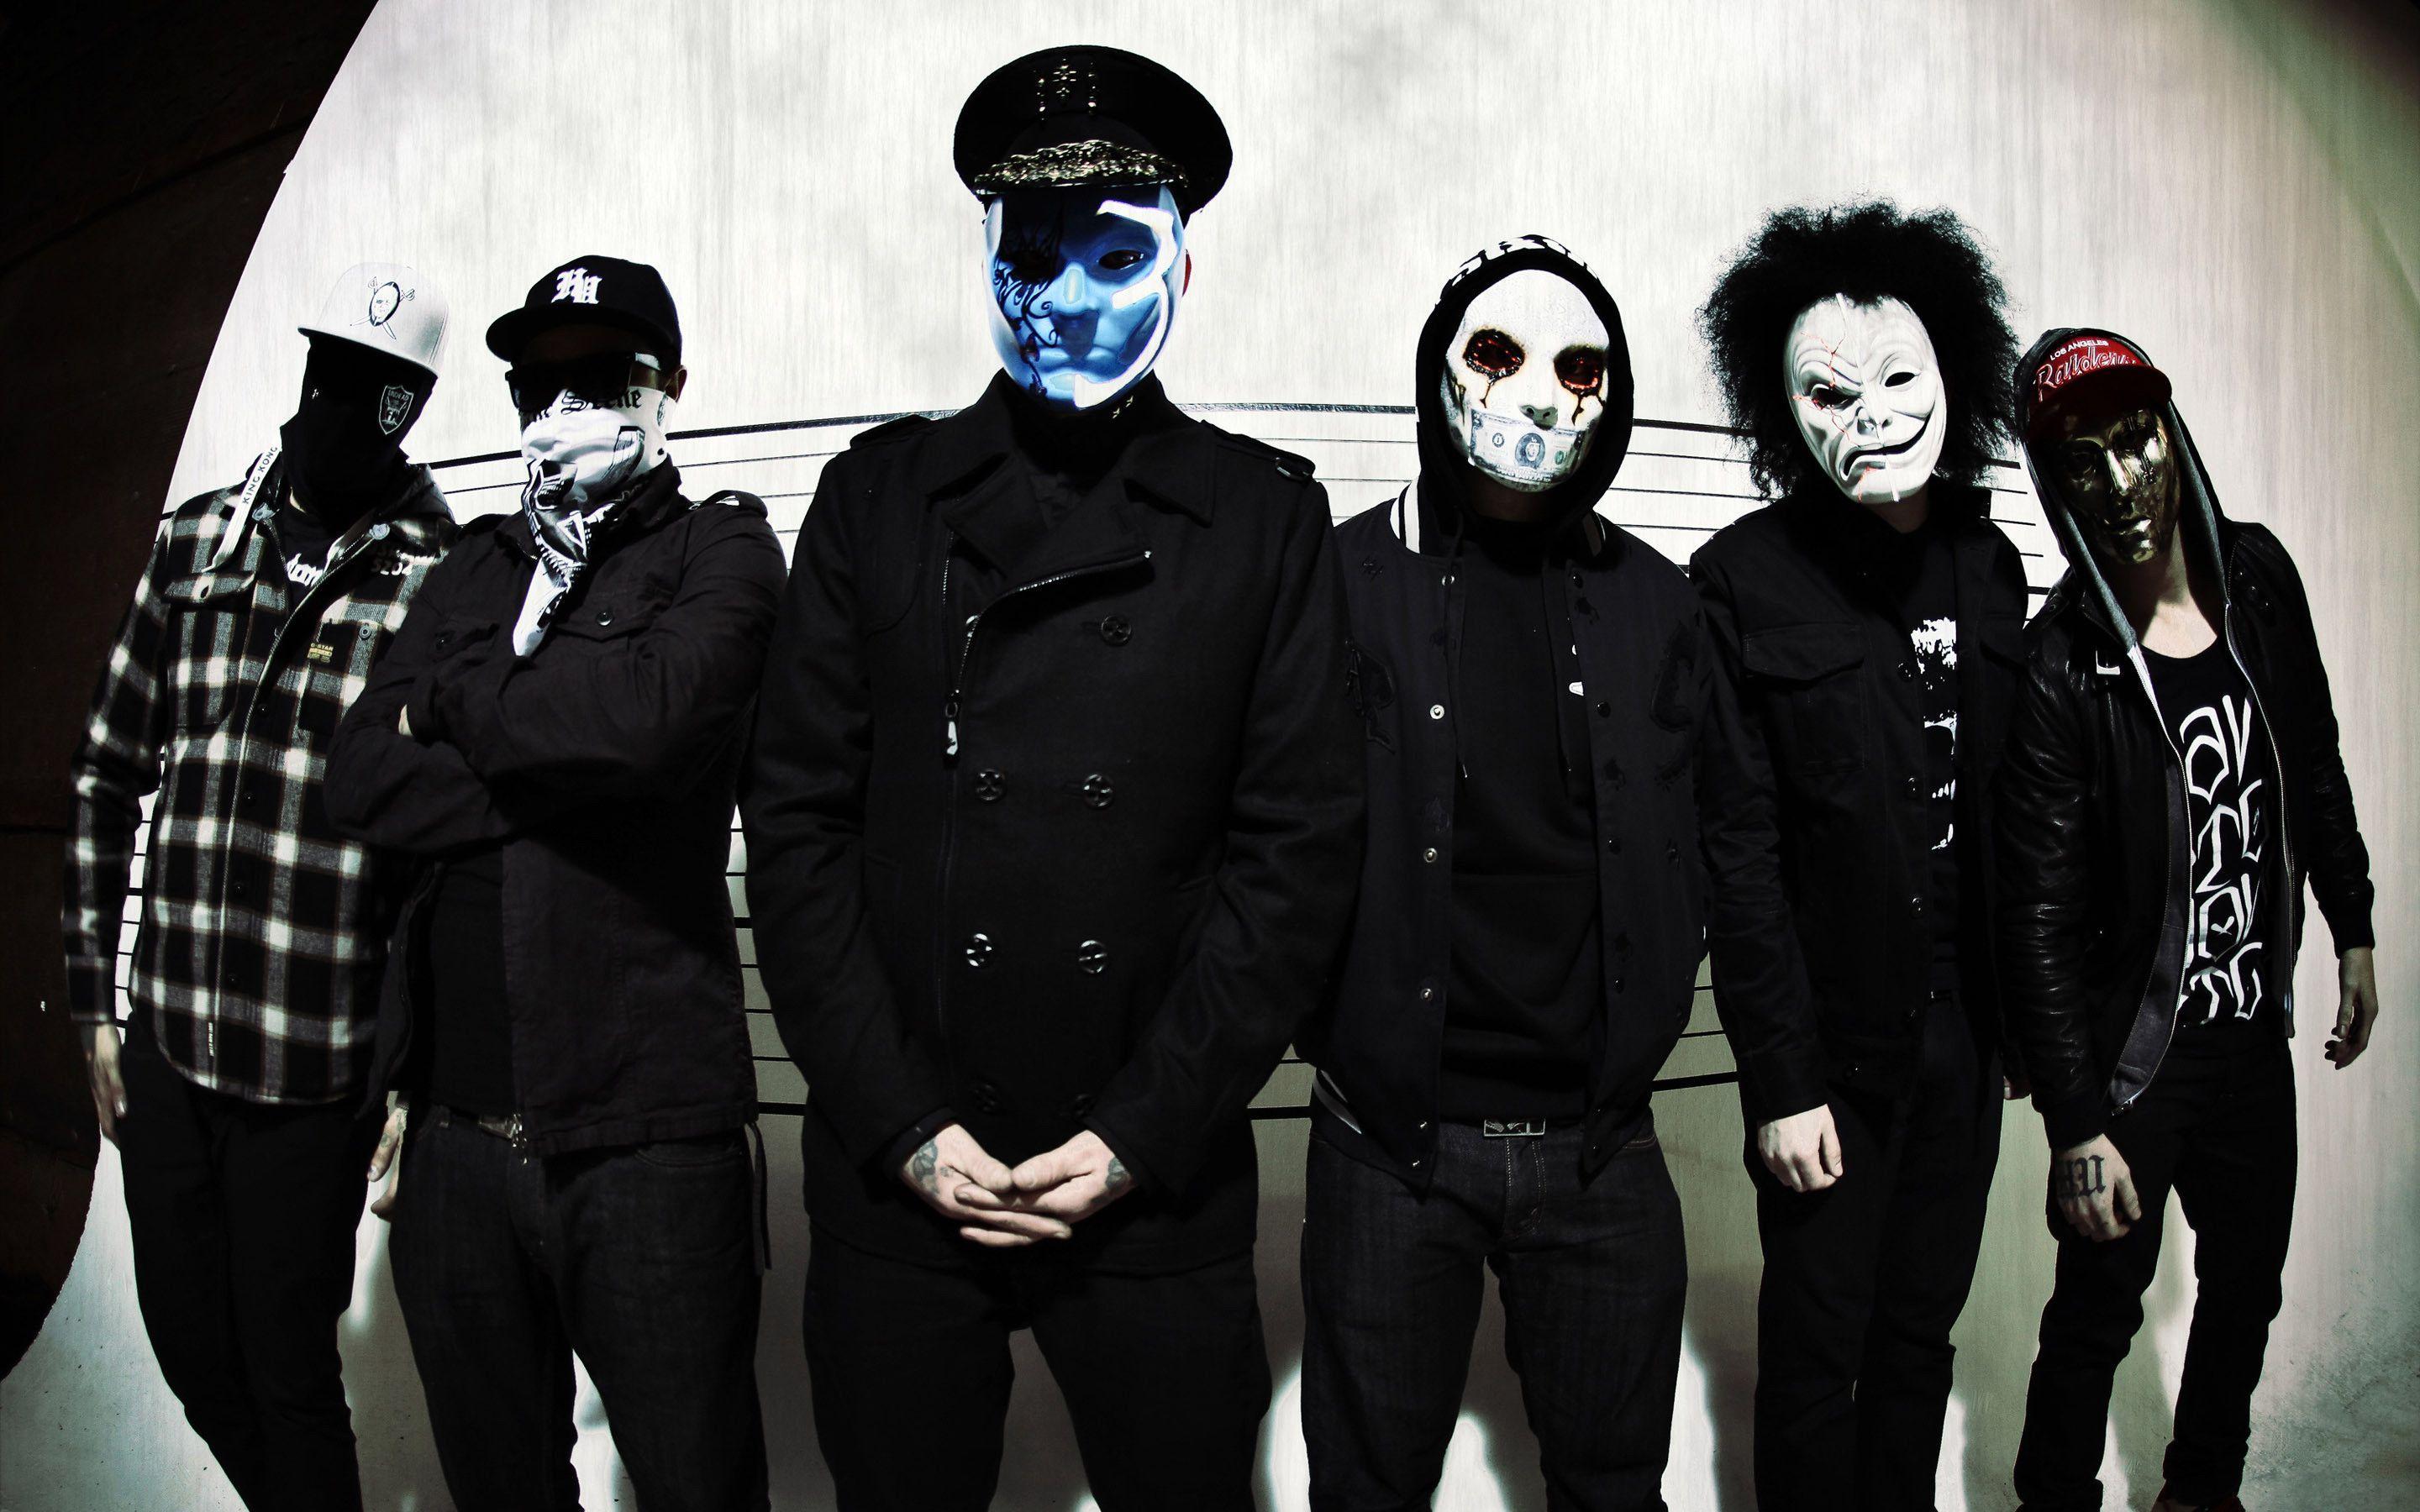 Wallpaper.wiki Hollywood Undead Wallpaper PIC WPE003634